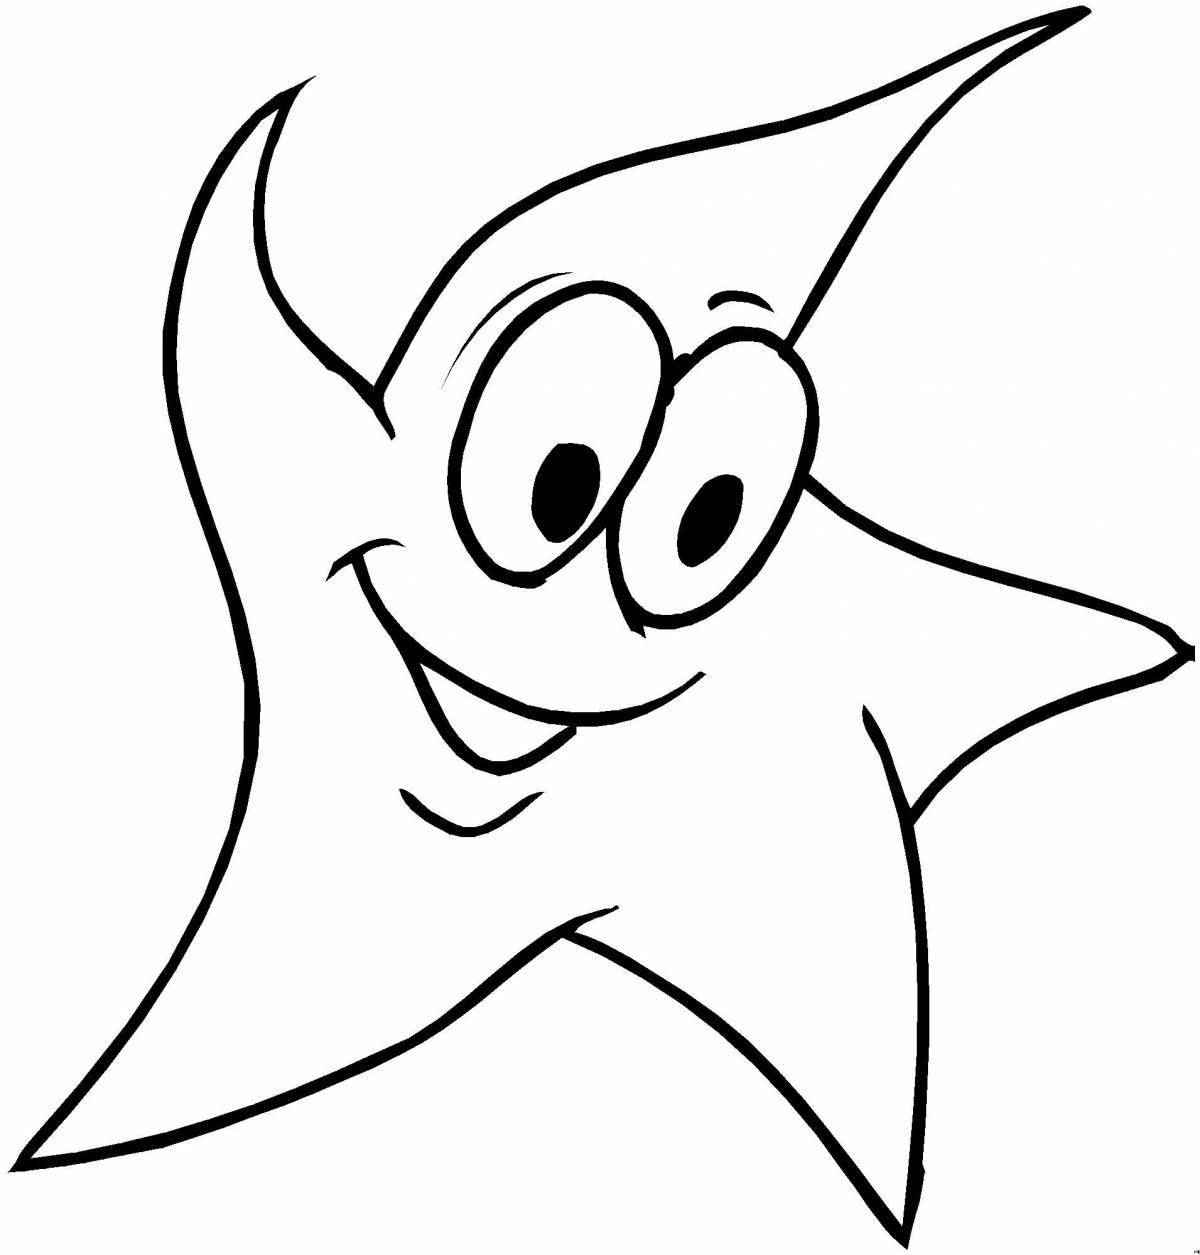 Amazing coloring pages with stars for kids